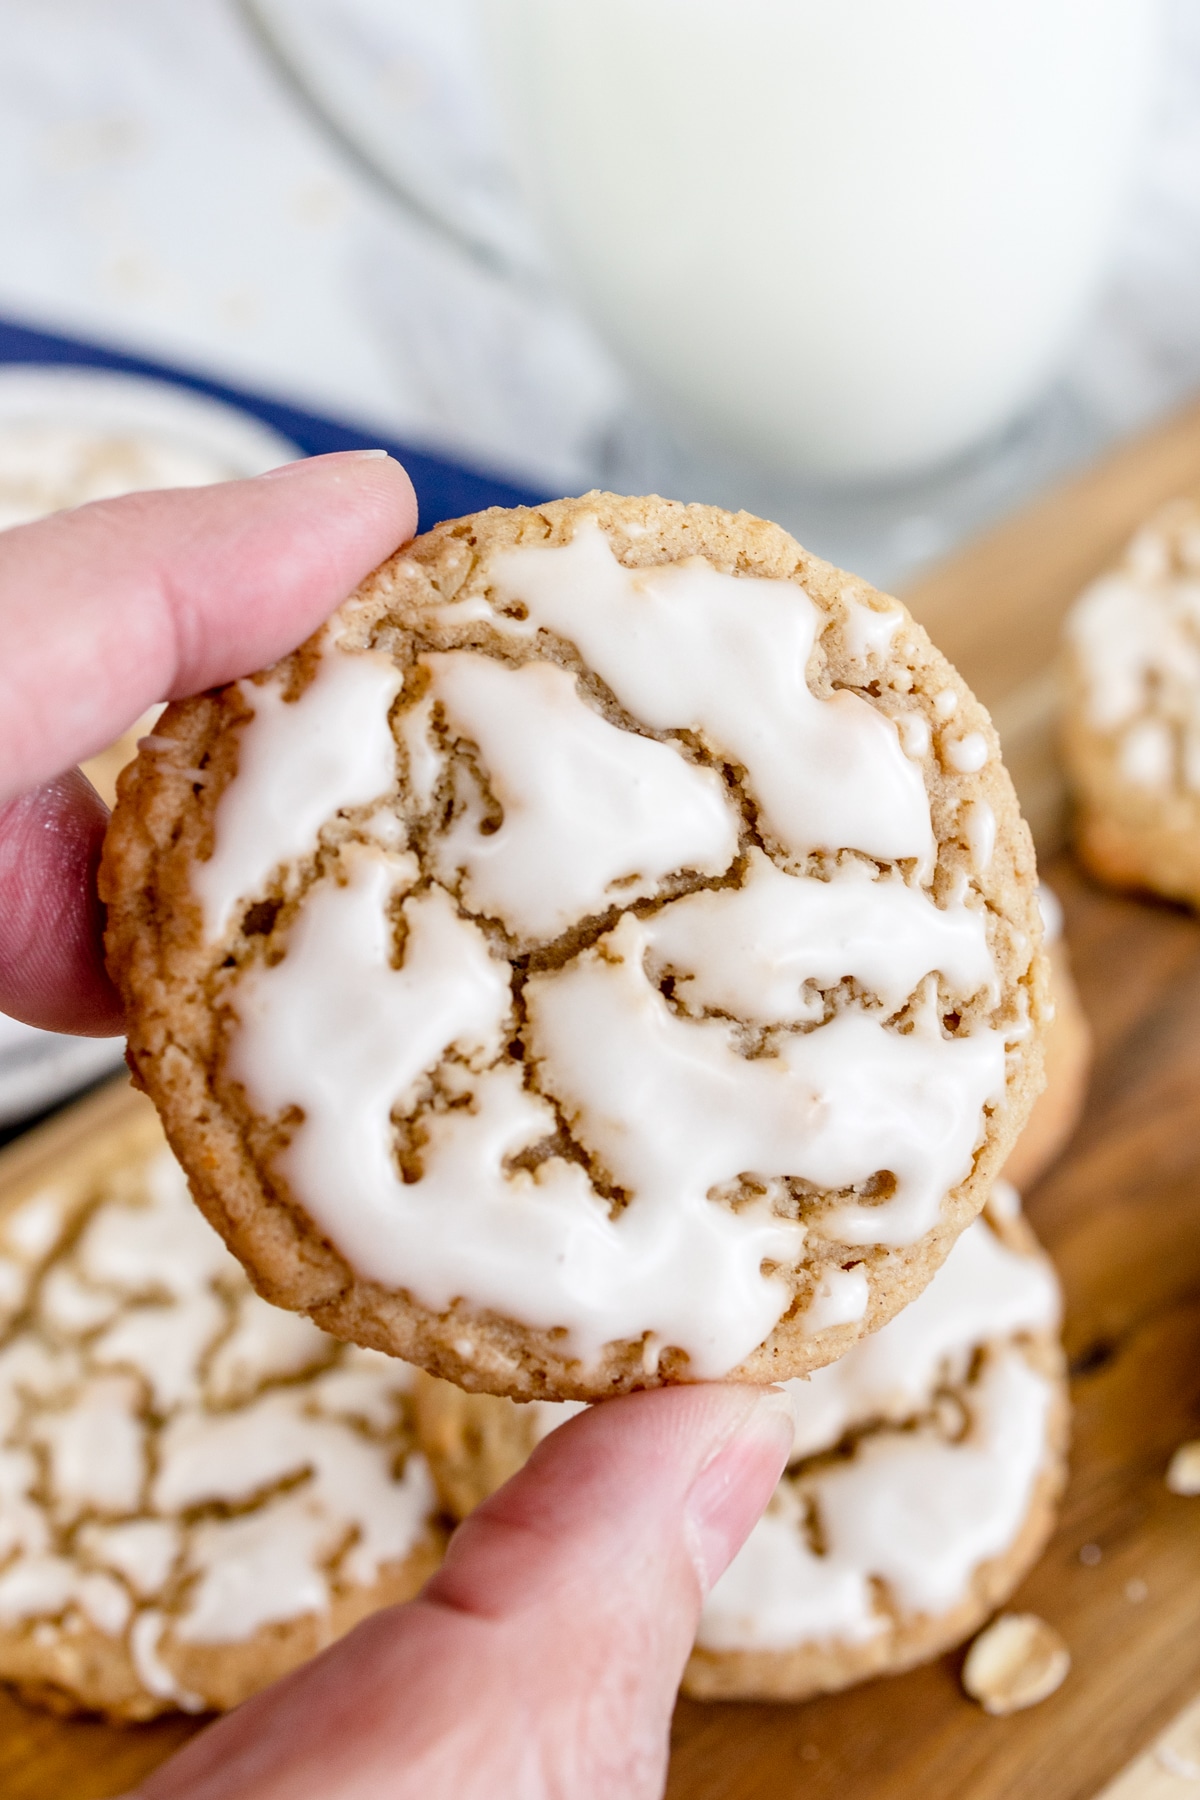 Close up of an Iced Oatmeal Cookie being held up by someone's hand.